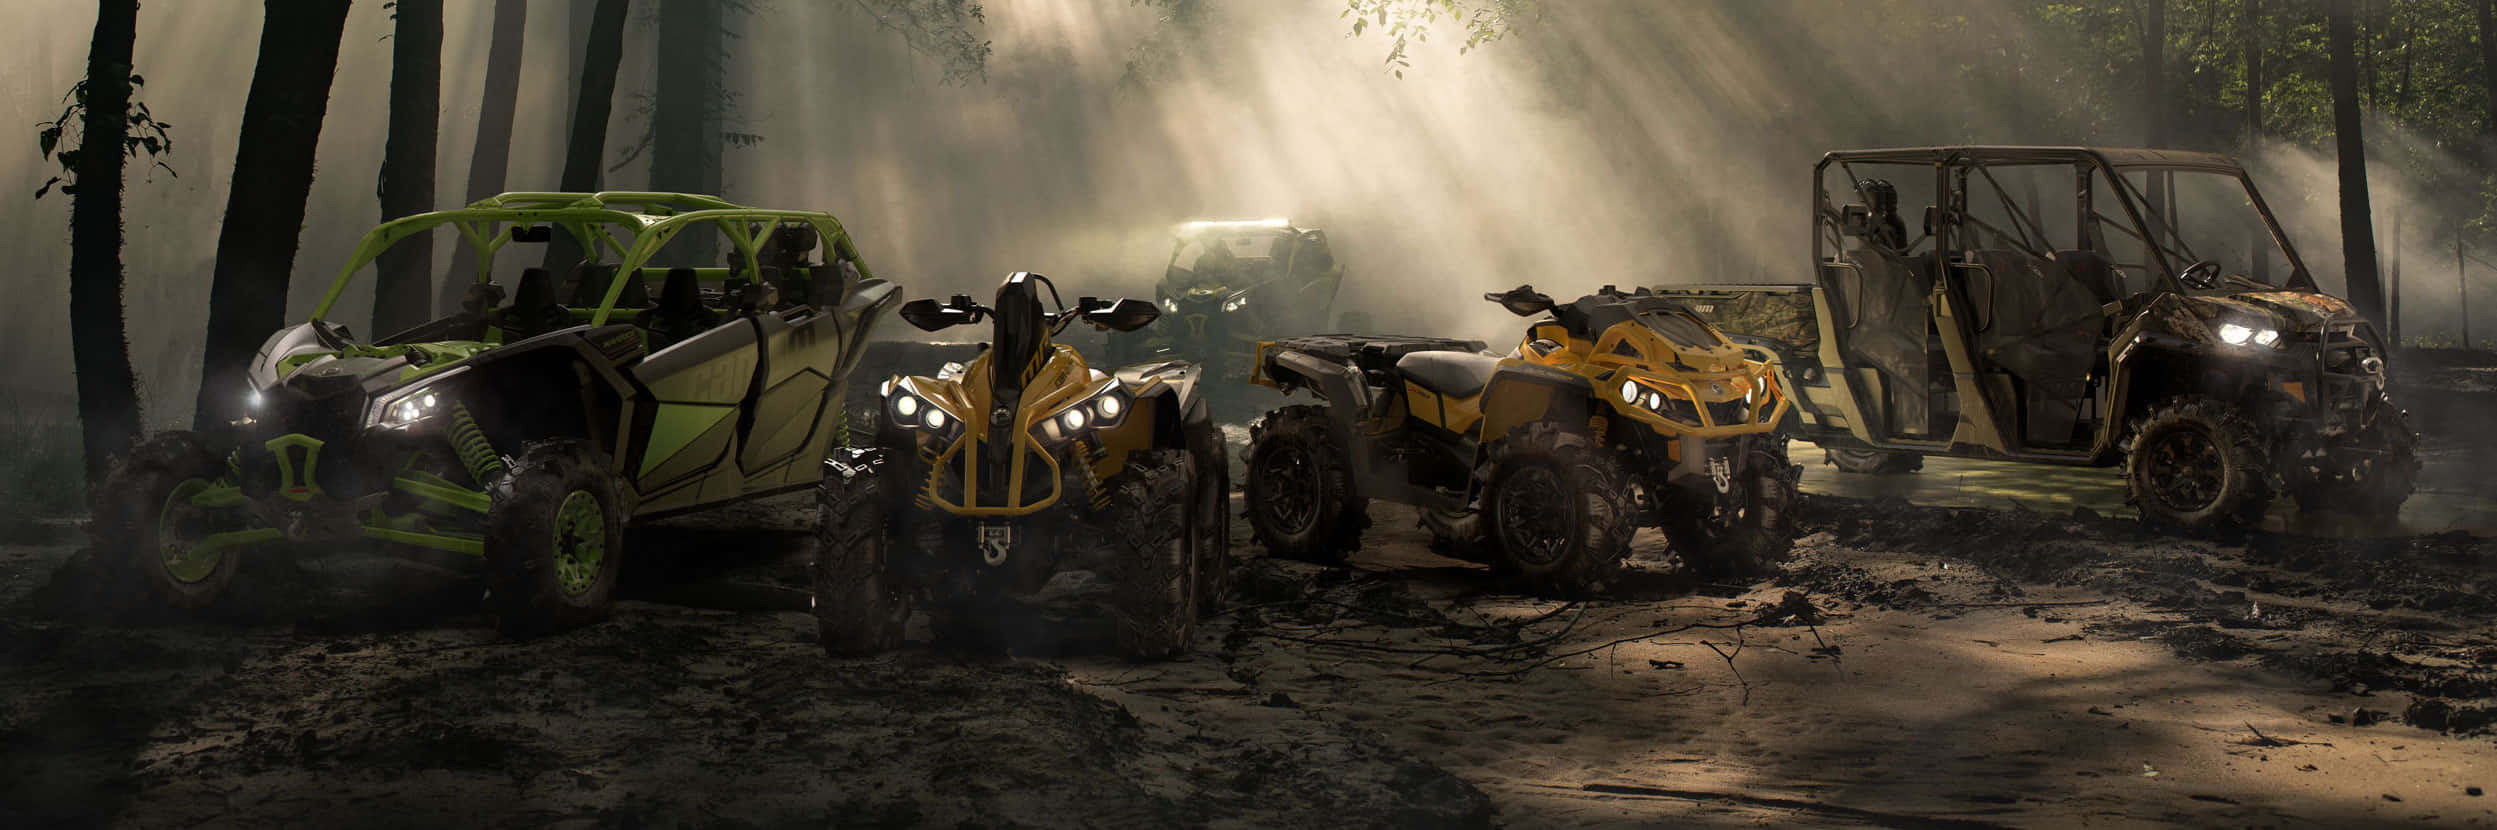 Offroad_ Vehicles_in_ Forest_ Dust Wallpaper